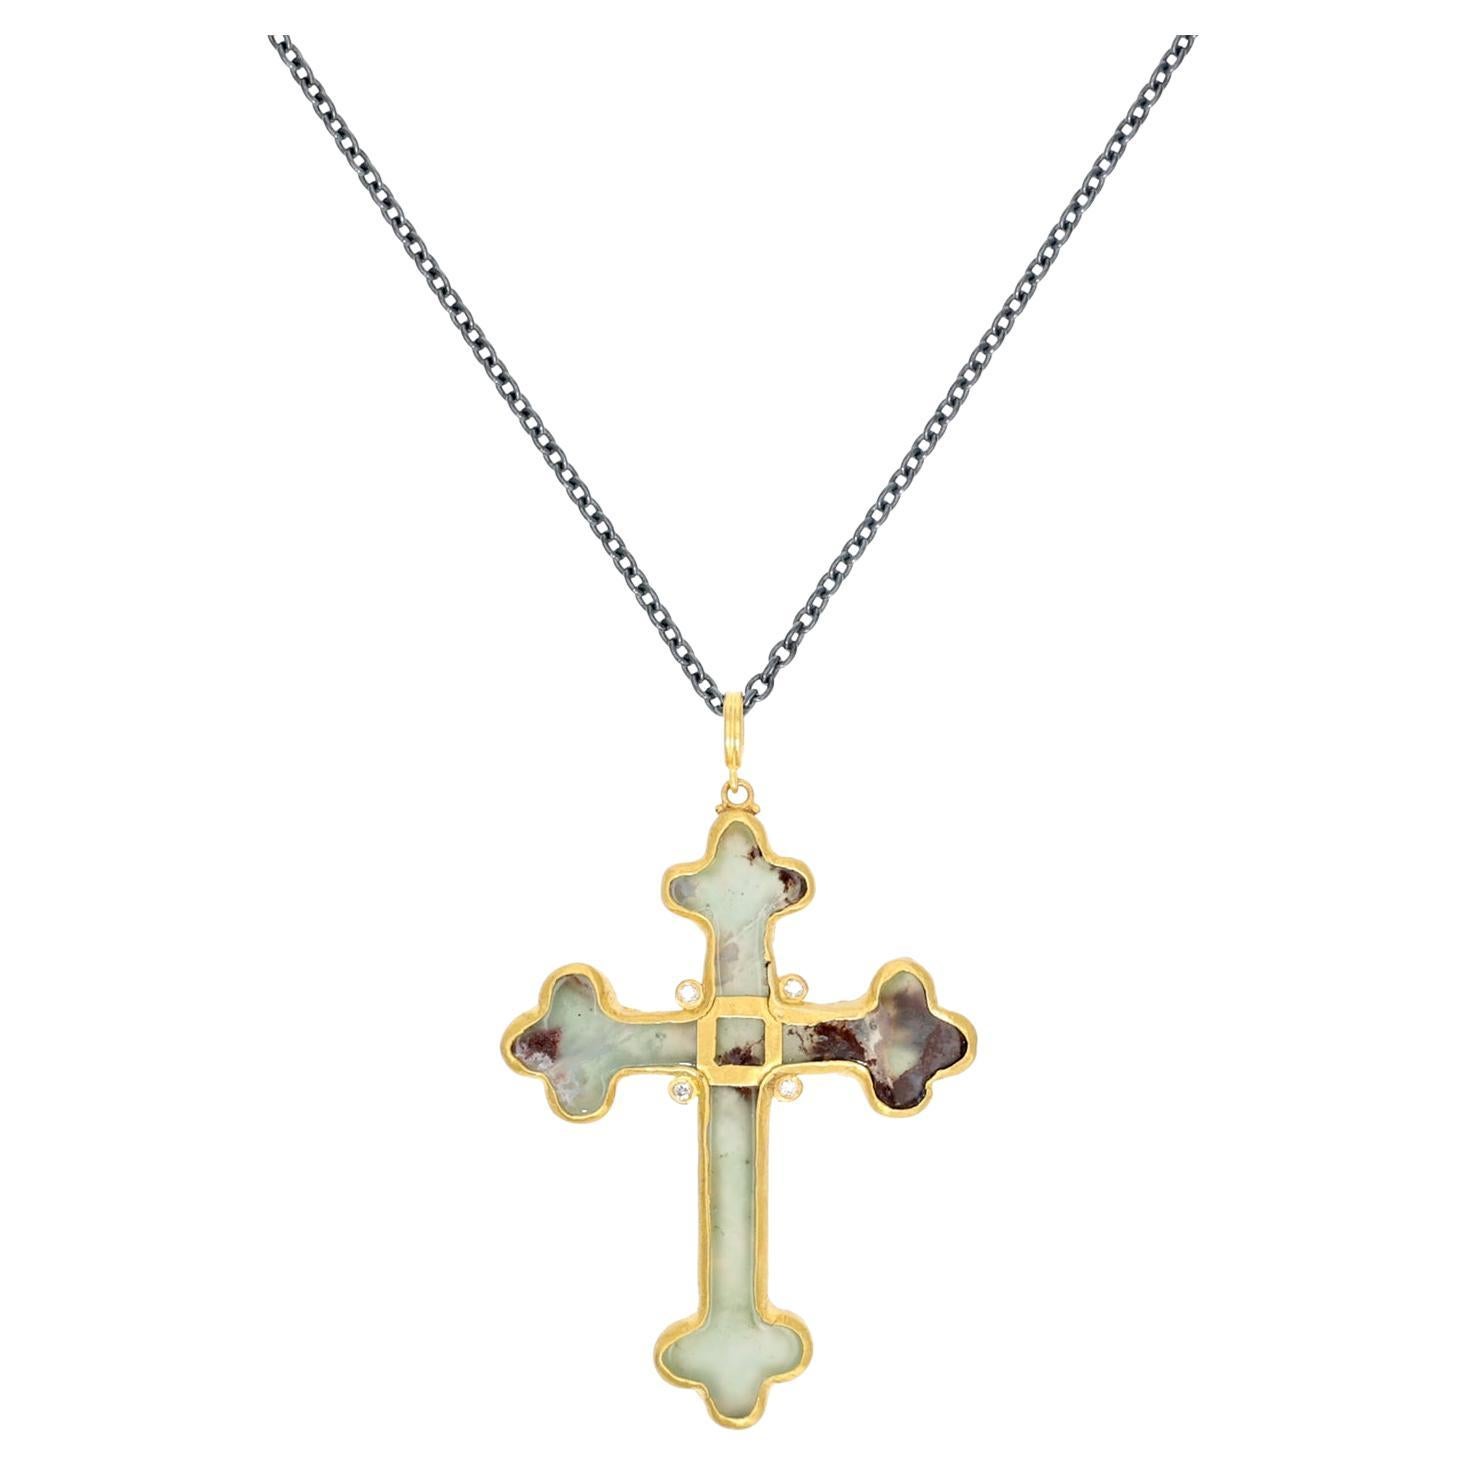 24K Gold and Oxidized Silver Aquaprase Cross Necklace by Lika Behar For Sale